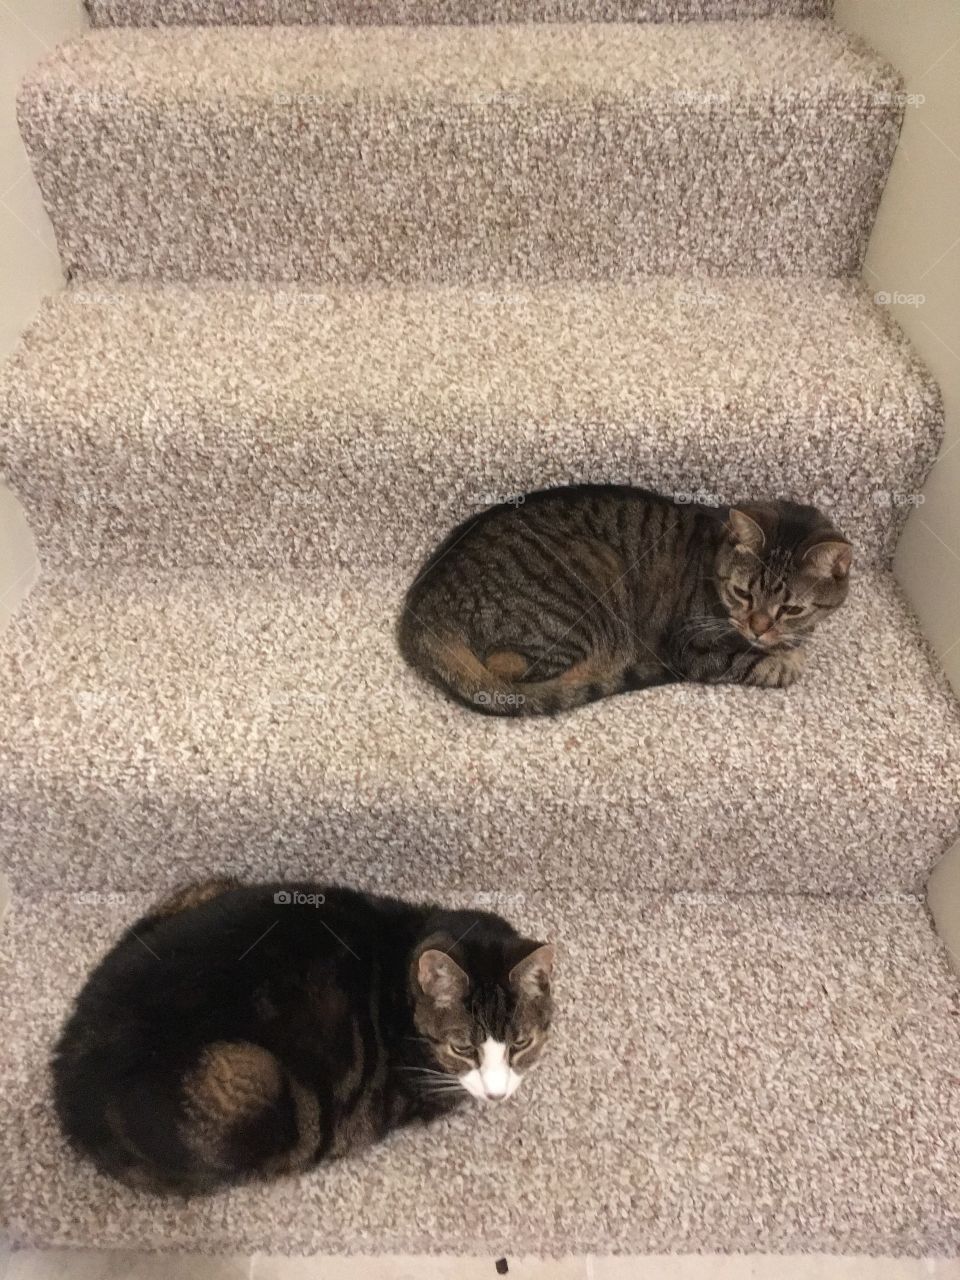 Stair cats